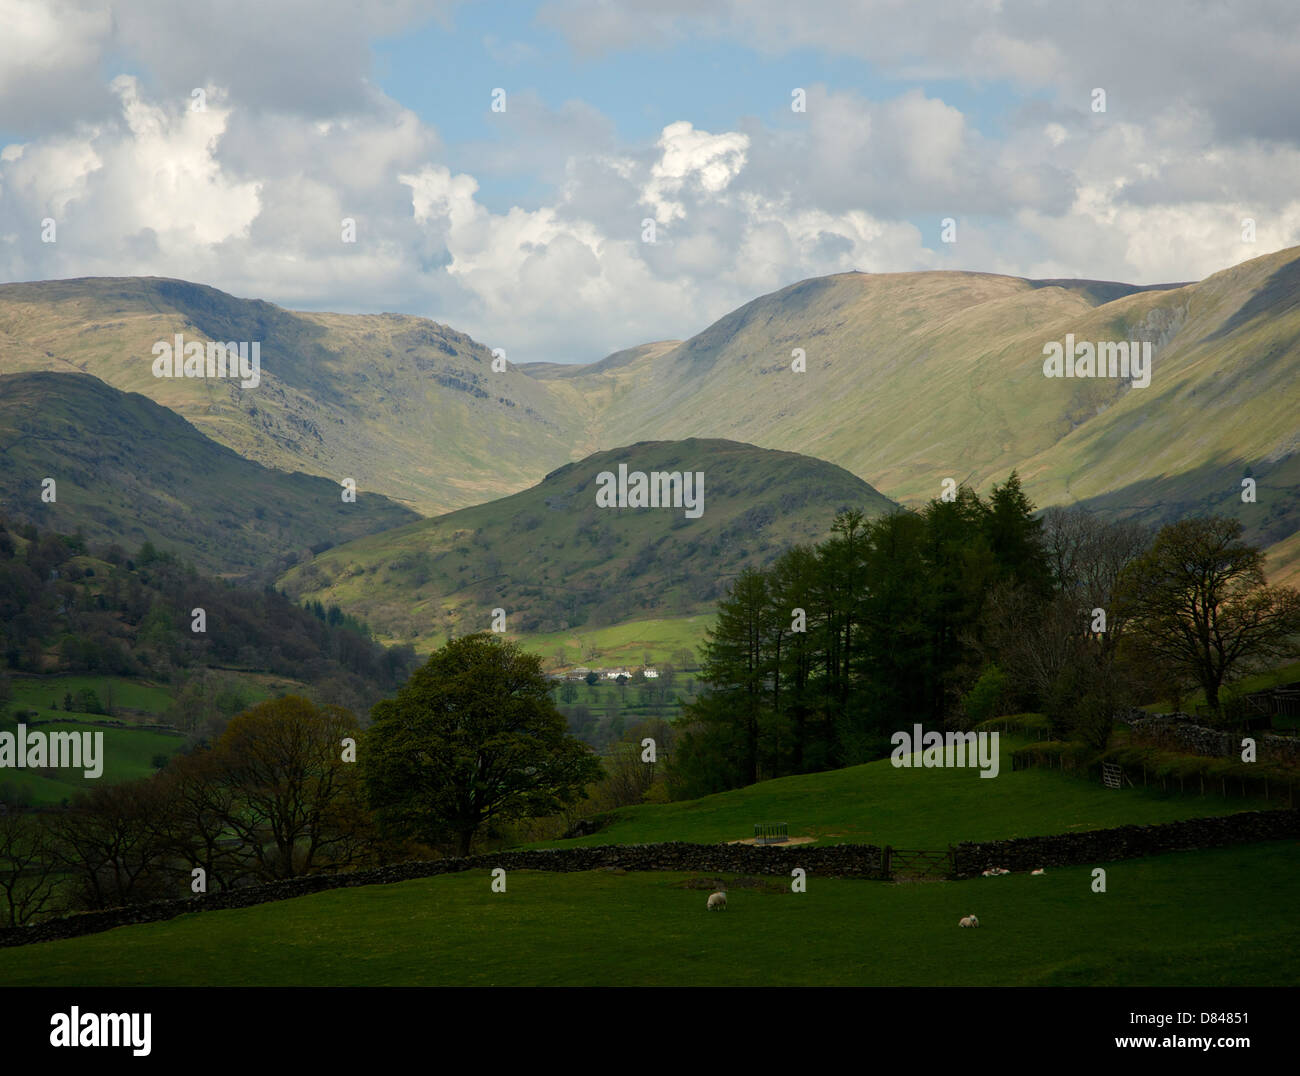 Troutbeck Park Farm, beneath hill known as The Tongue, Troutbeck Valley, Lake District National Park, Cumbria, England UK Stock Photo